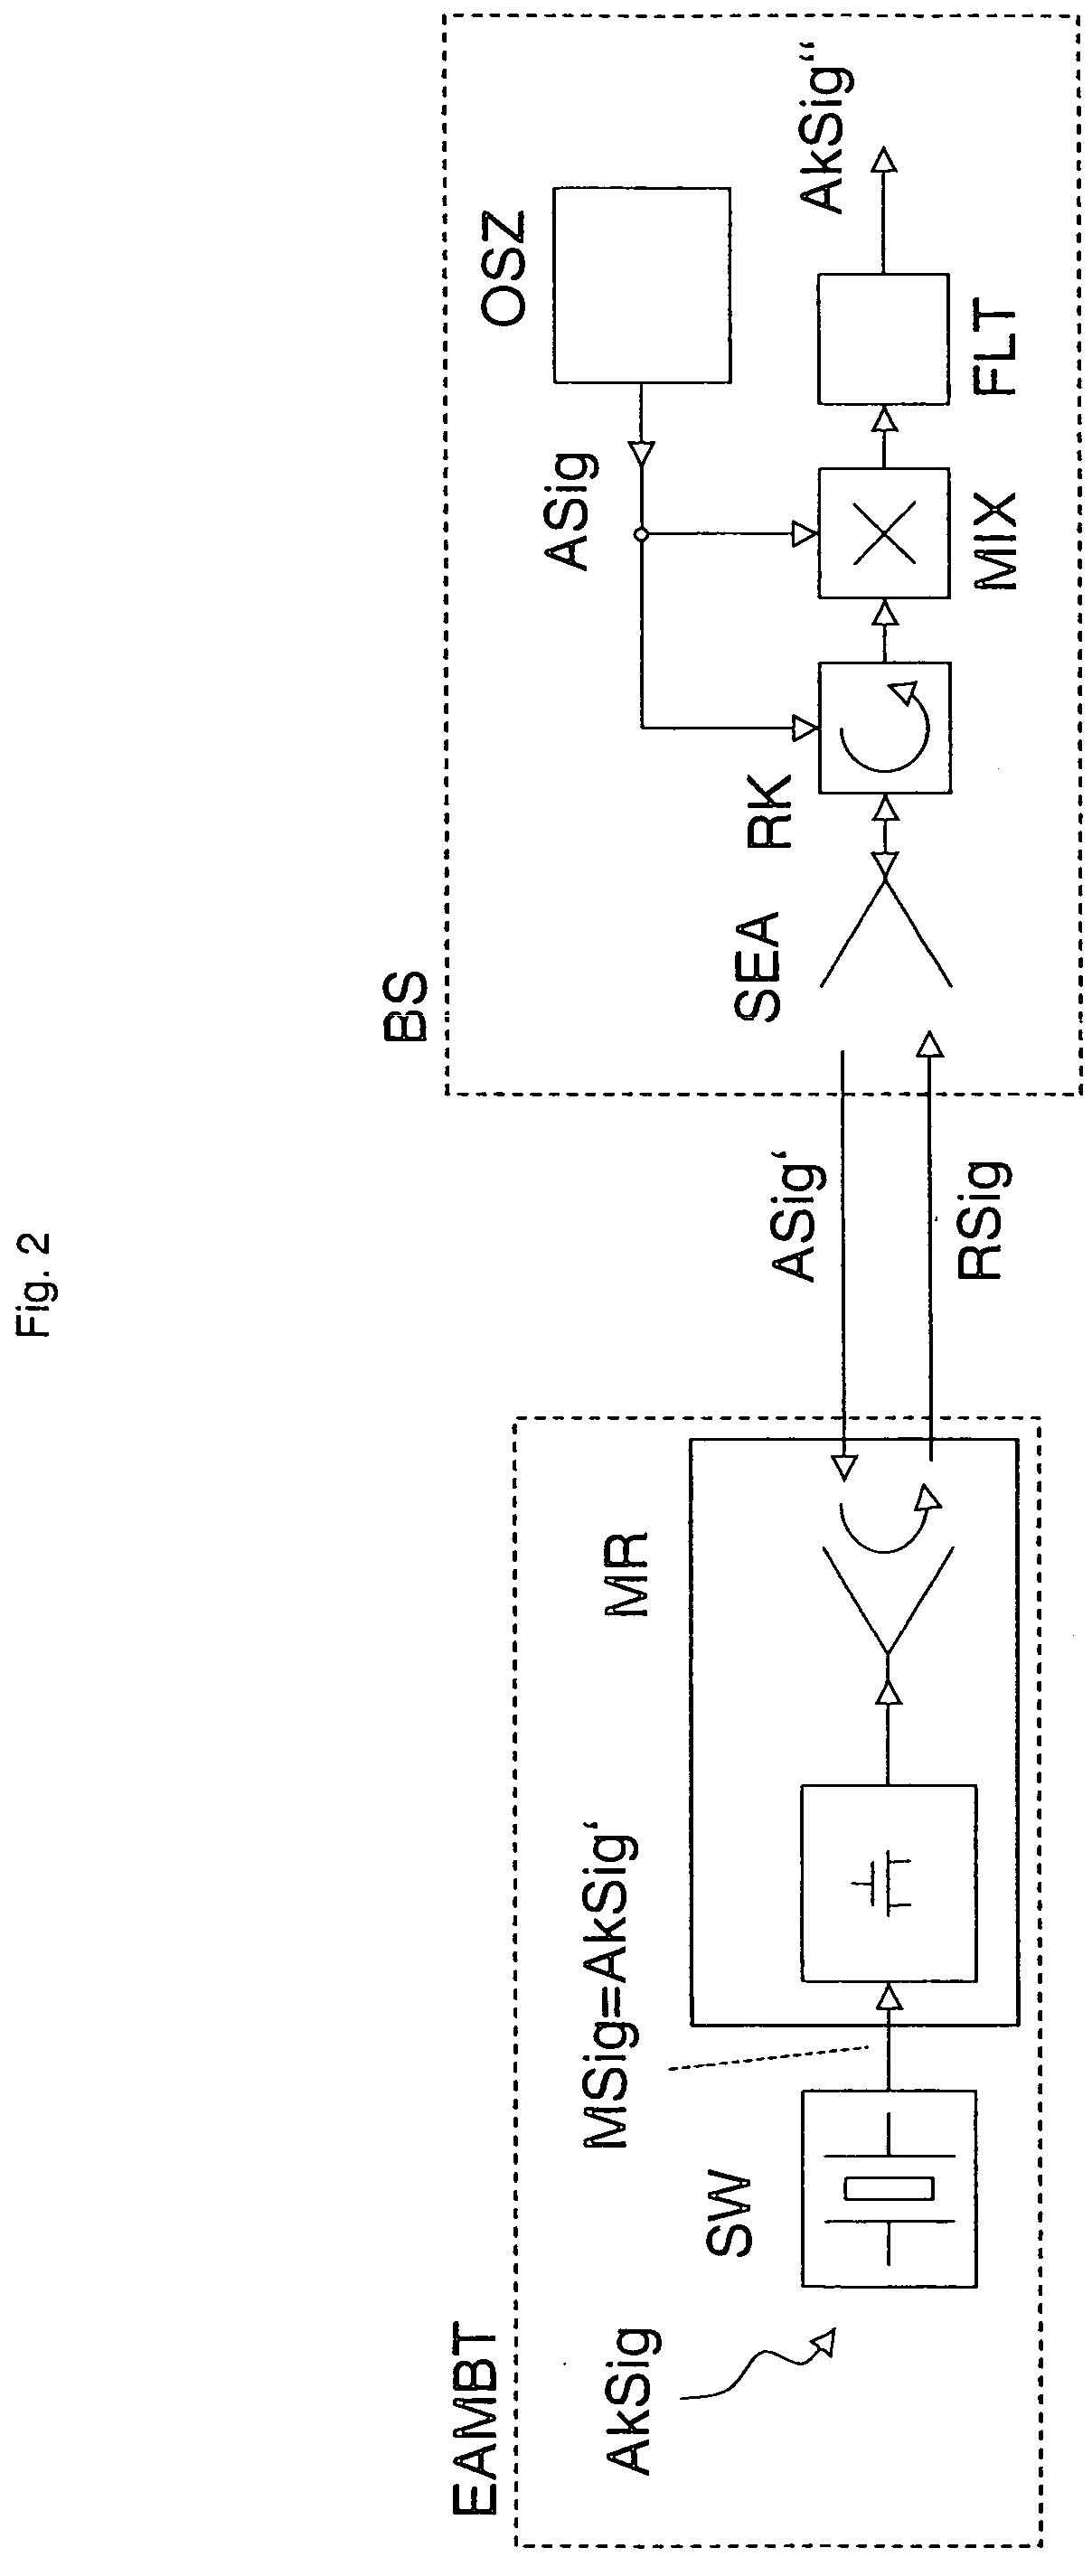 Tire measuring device with a modulated backscatter transponder self-sufficient in terms of energy